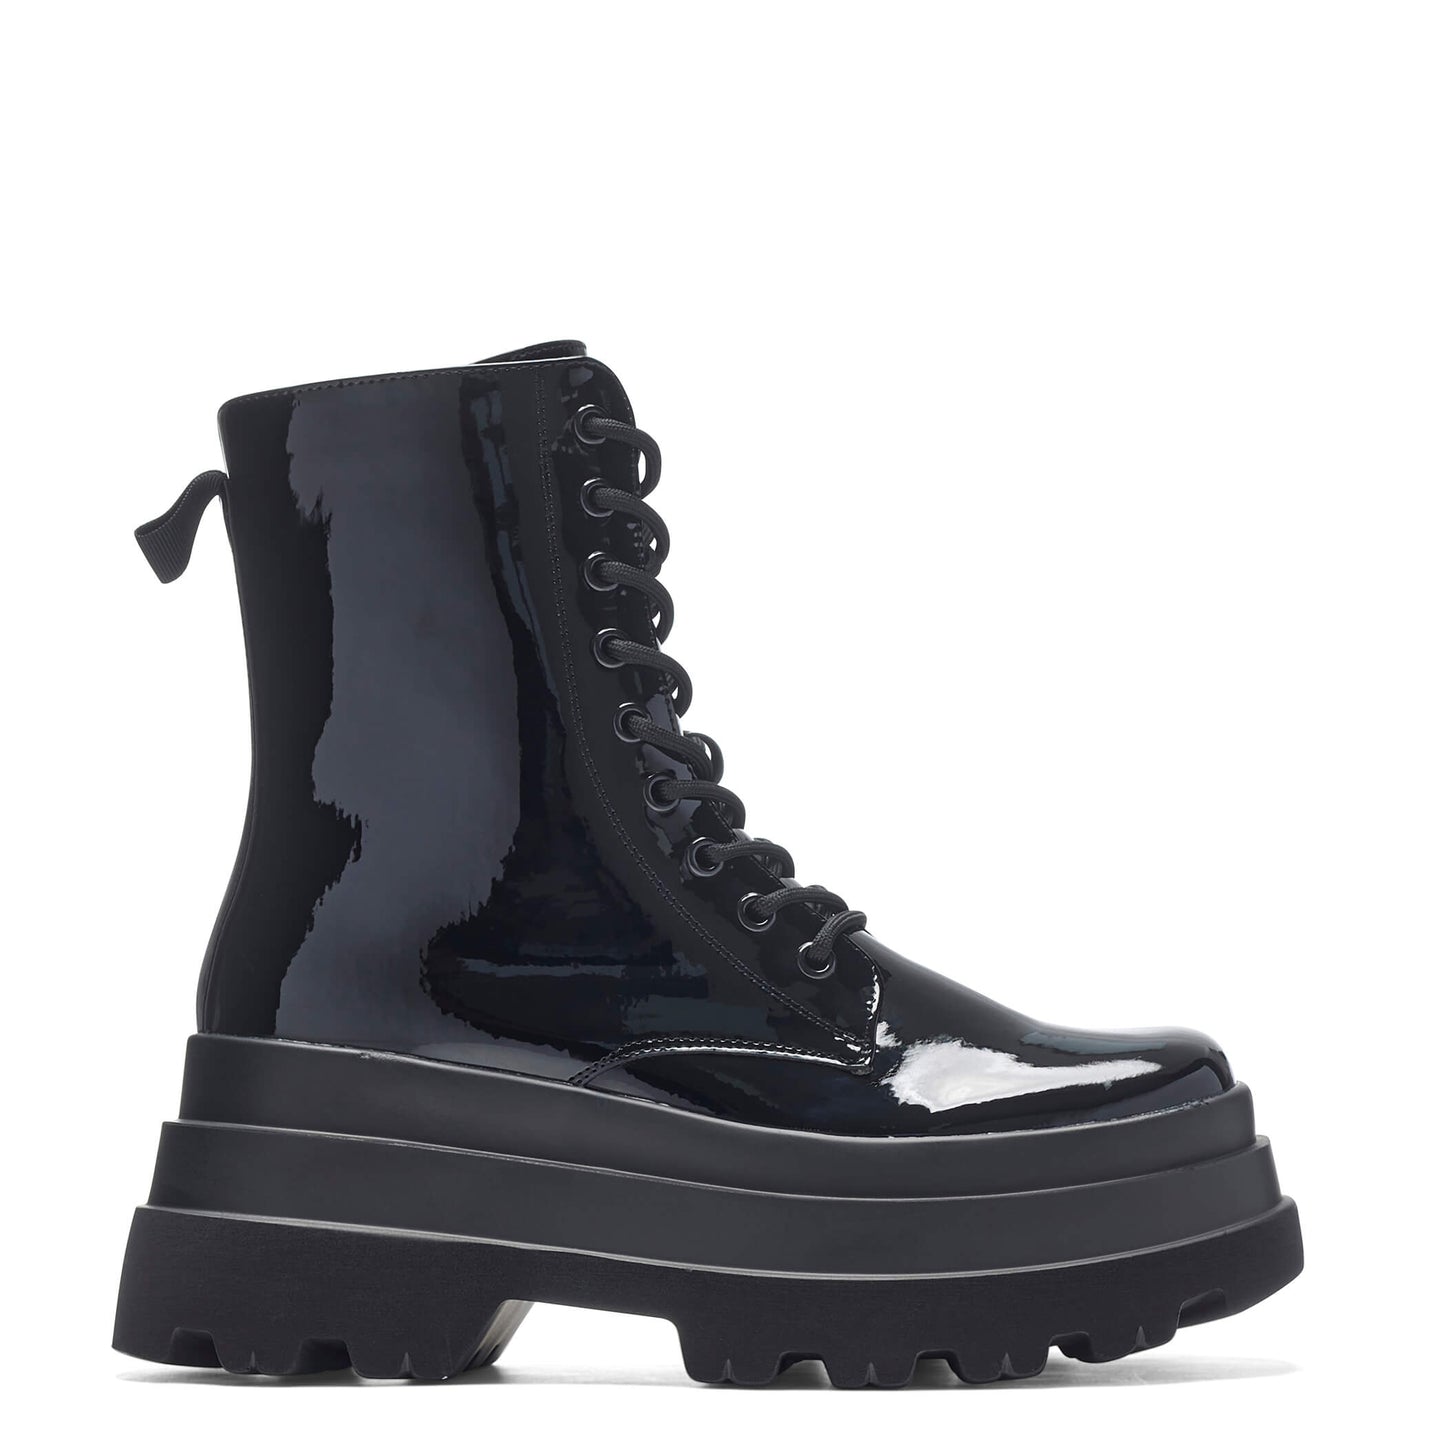 Deathwatch Trident Patent Platform Boots - Ankle Boots - KOI Footwear - Black - Side View